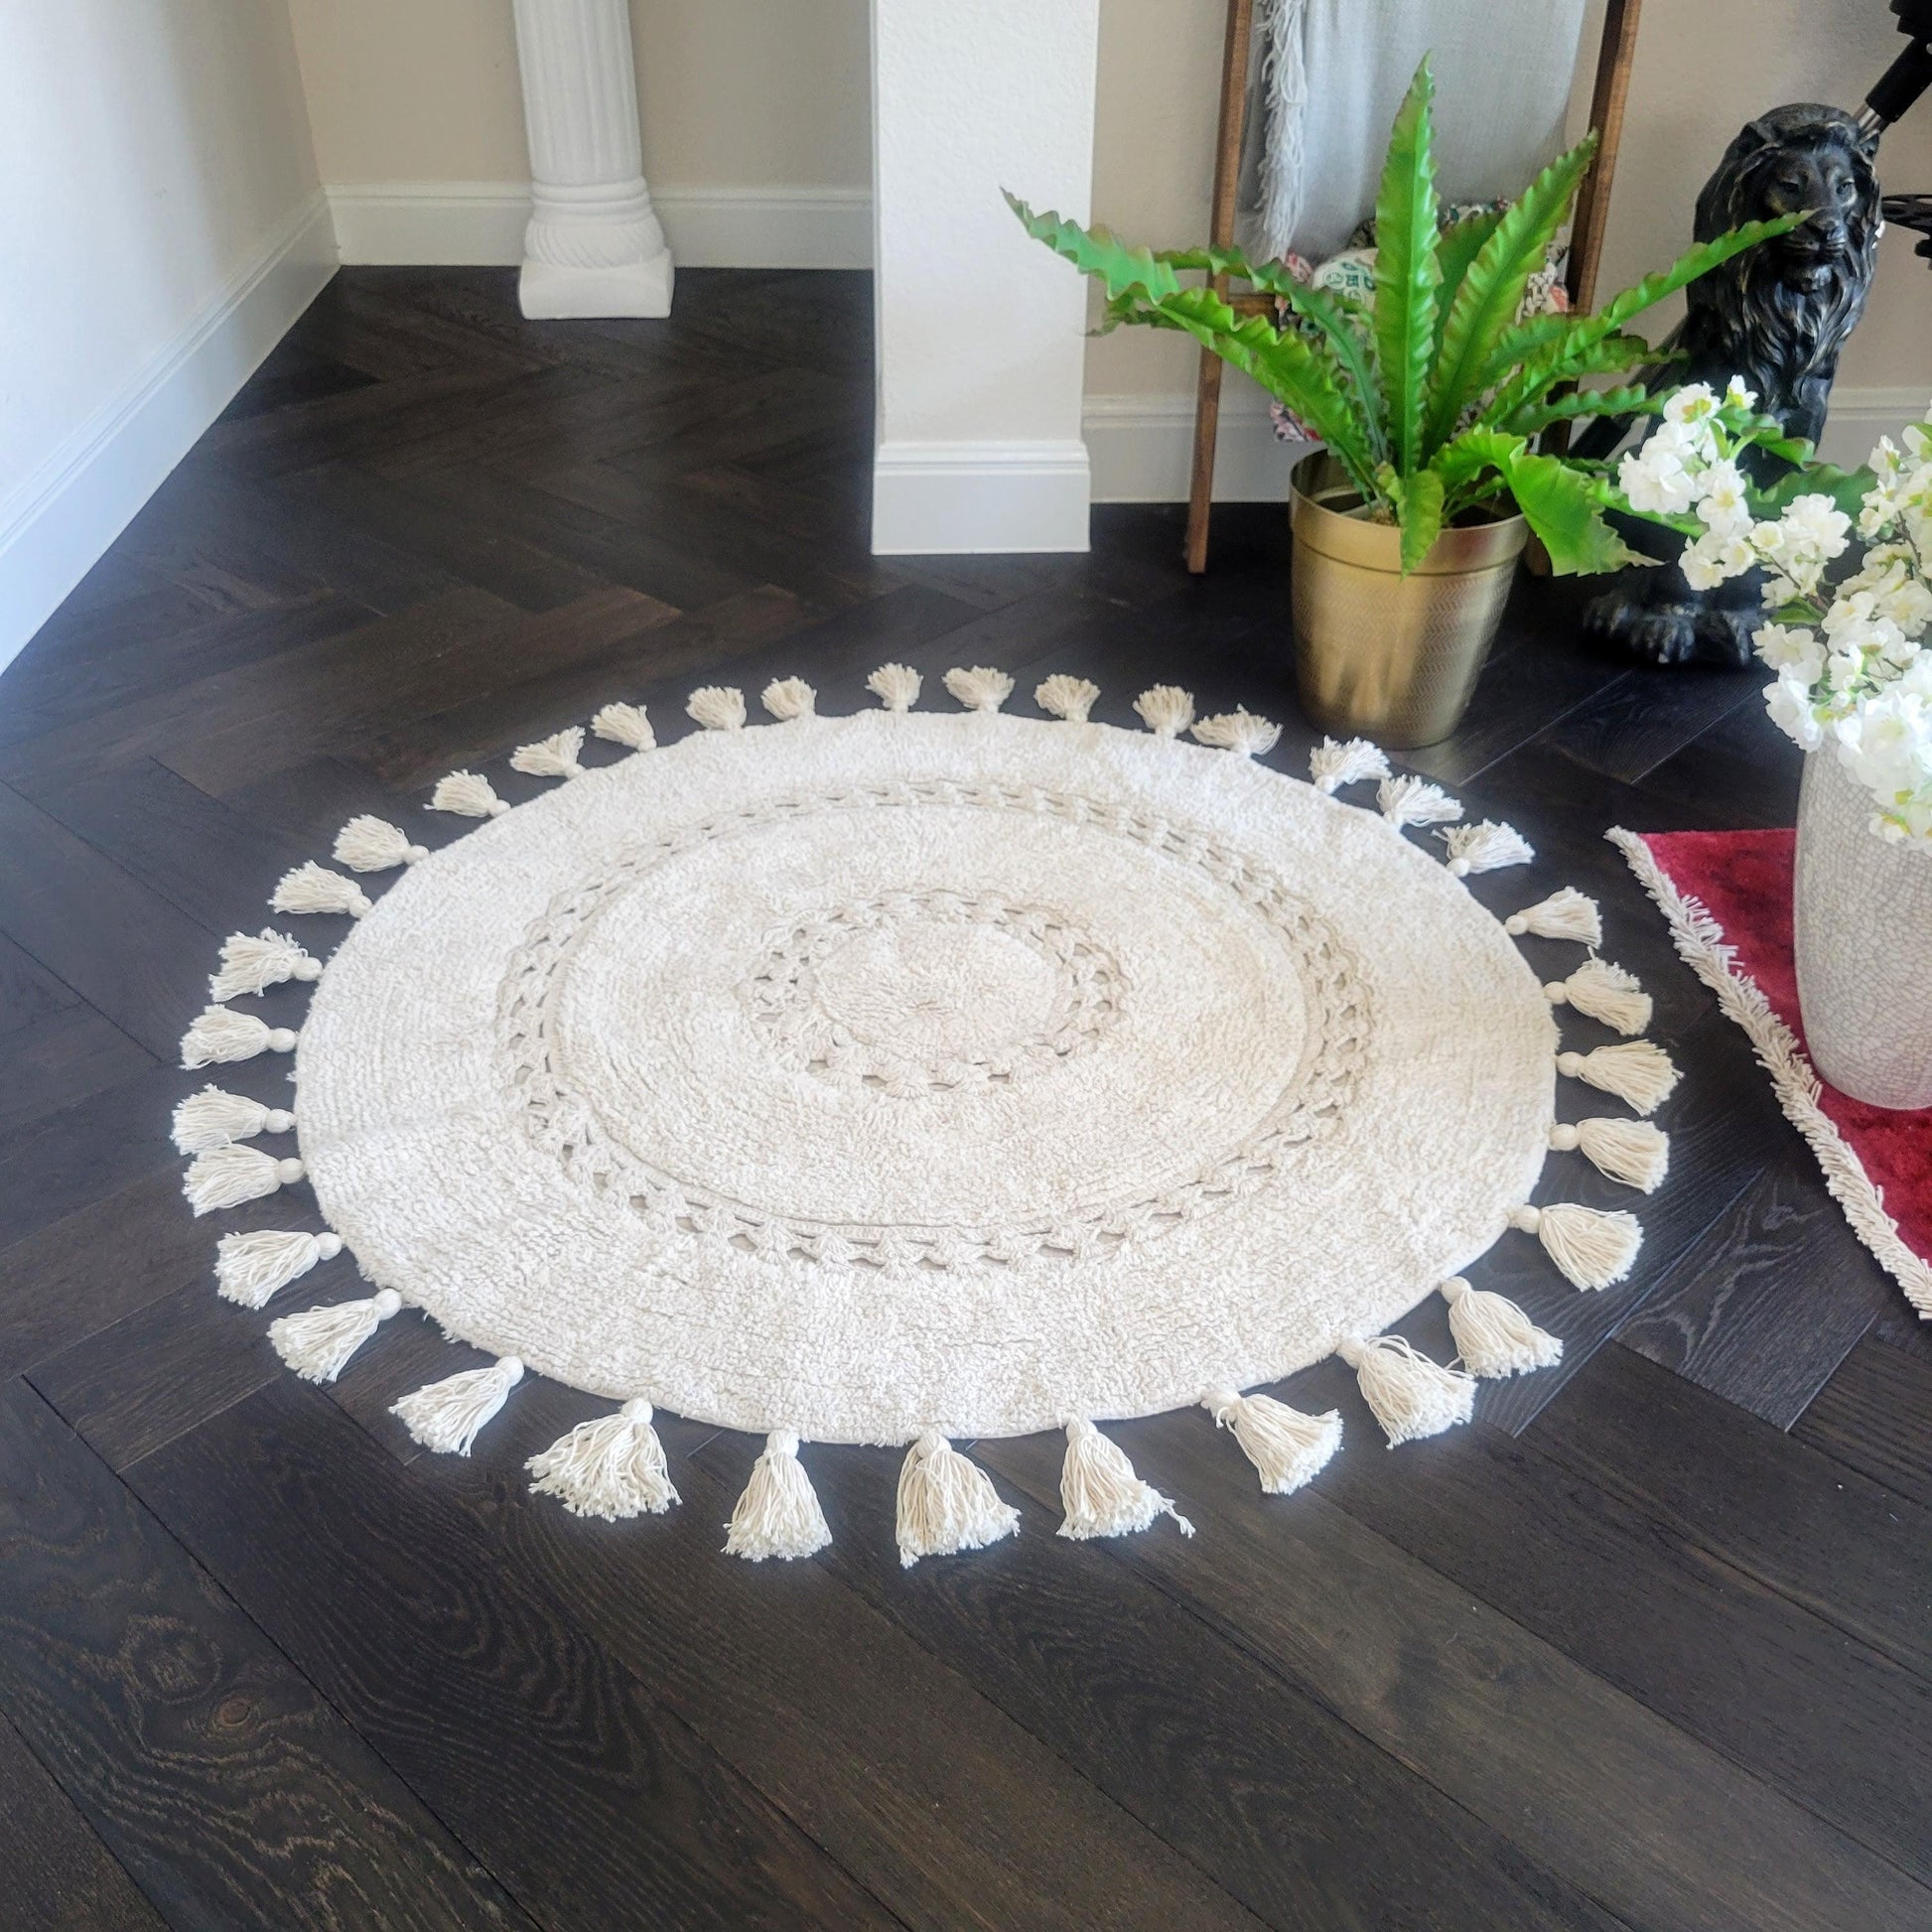 100% Non-Toxic Cotton Boho Round Crocheted Bath Rug with Tassels - Extra  Large